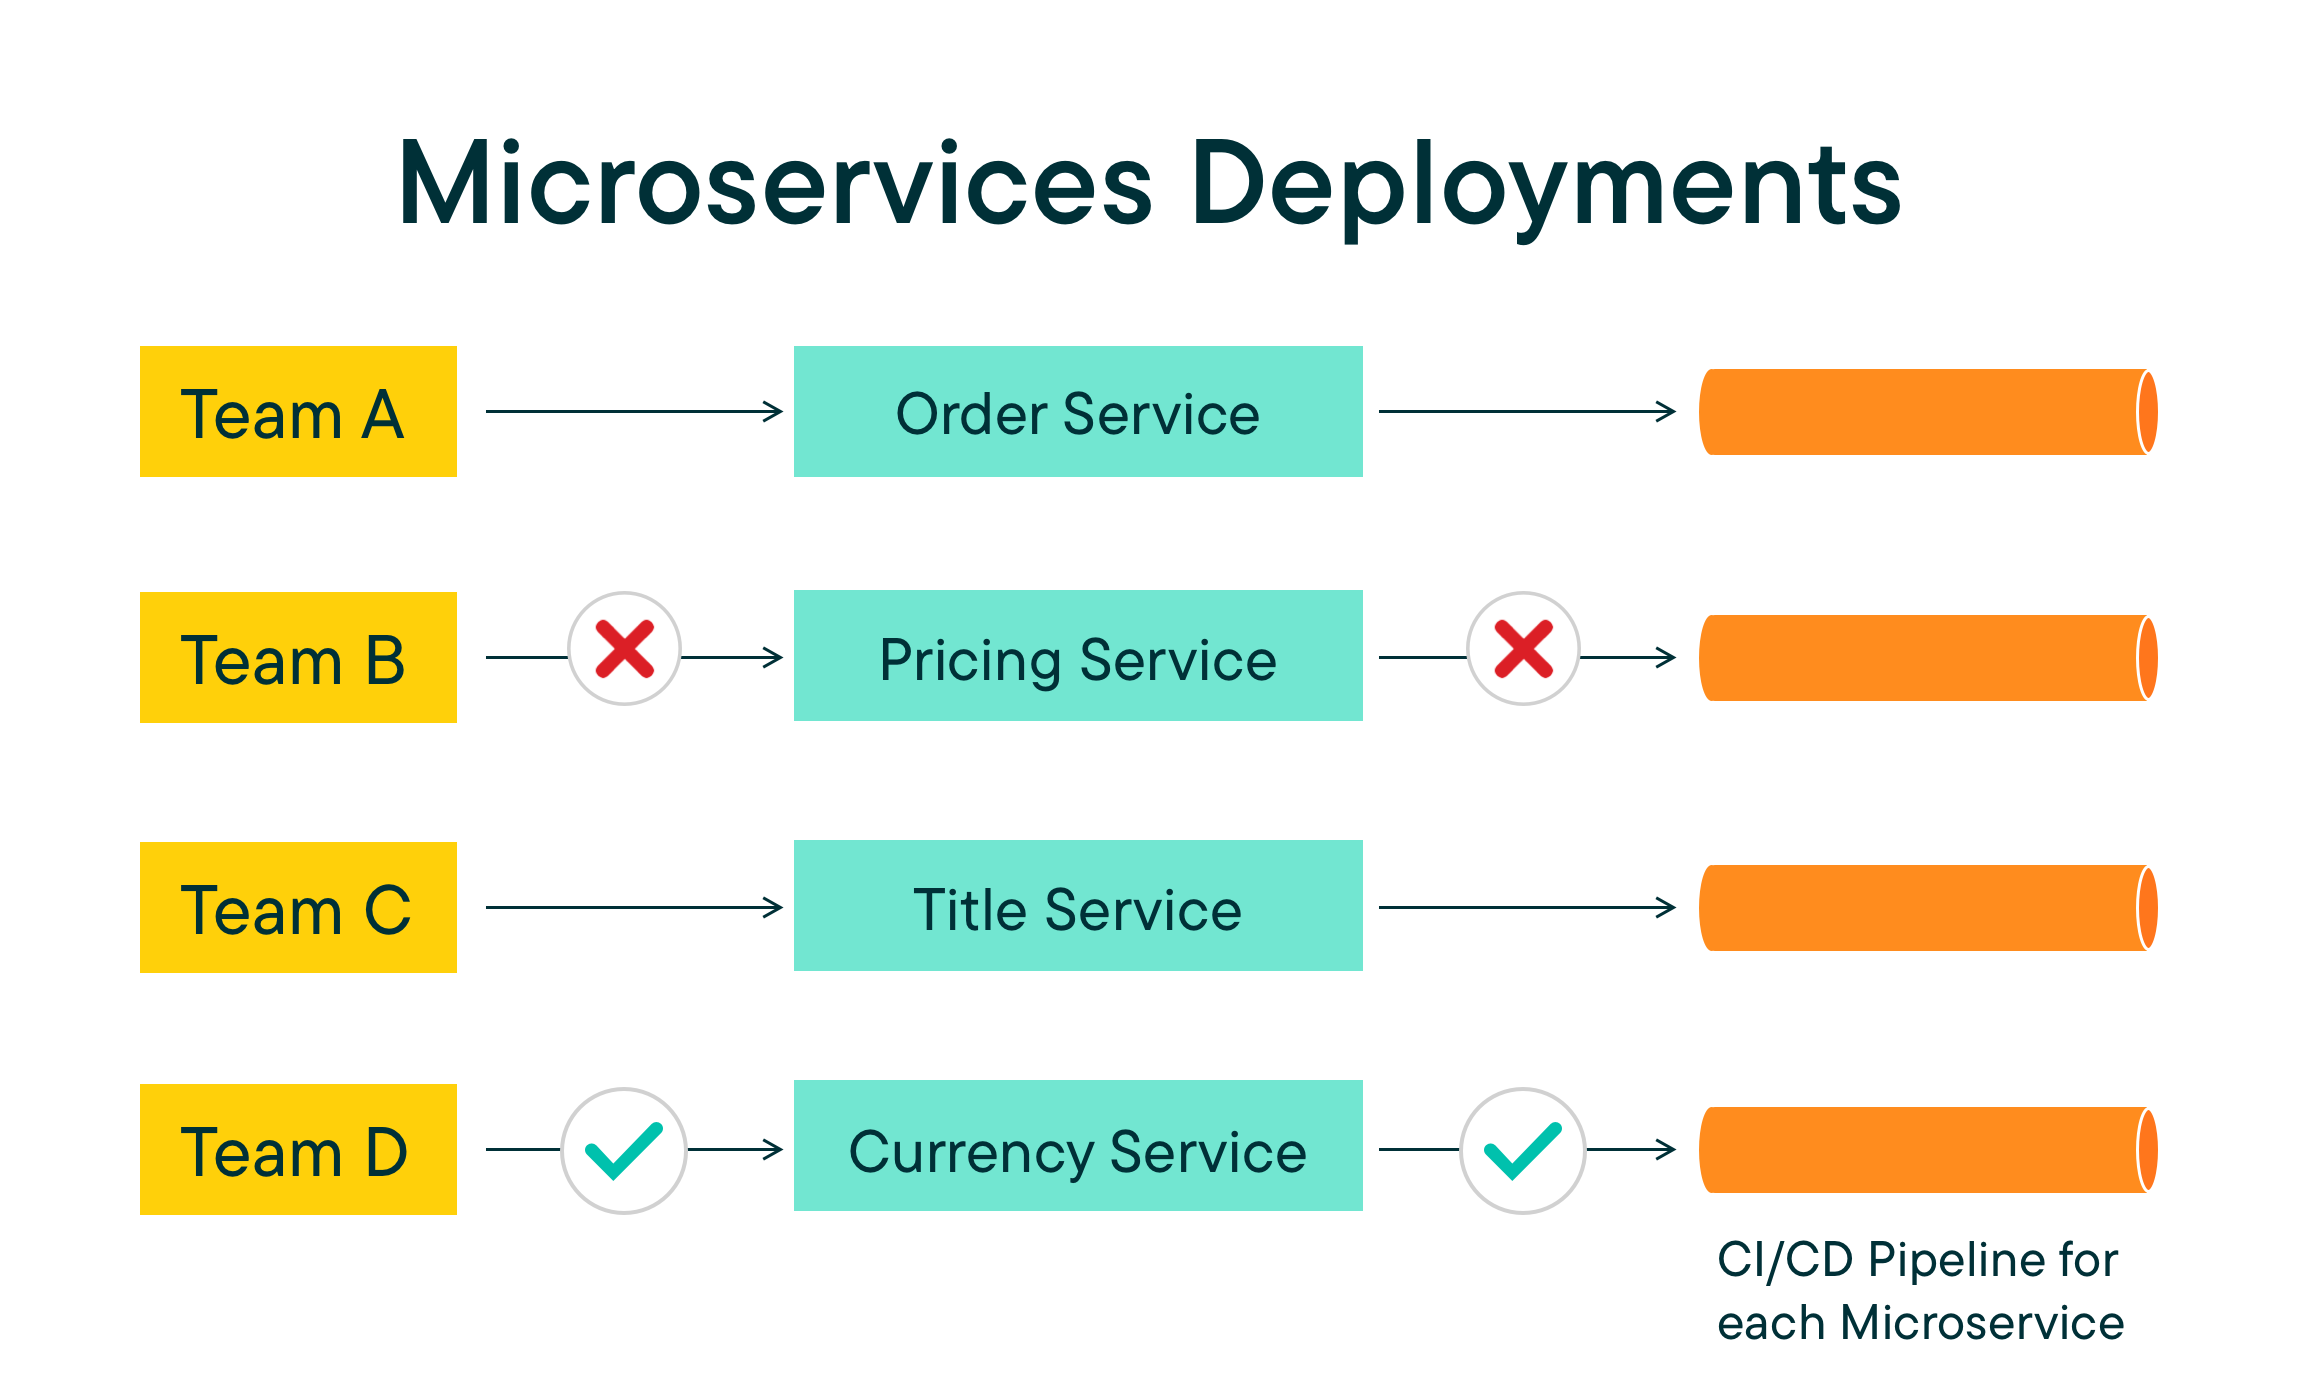 Microservices deployments with the strangler pattern